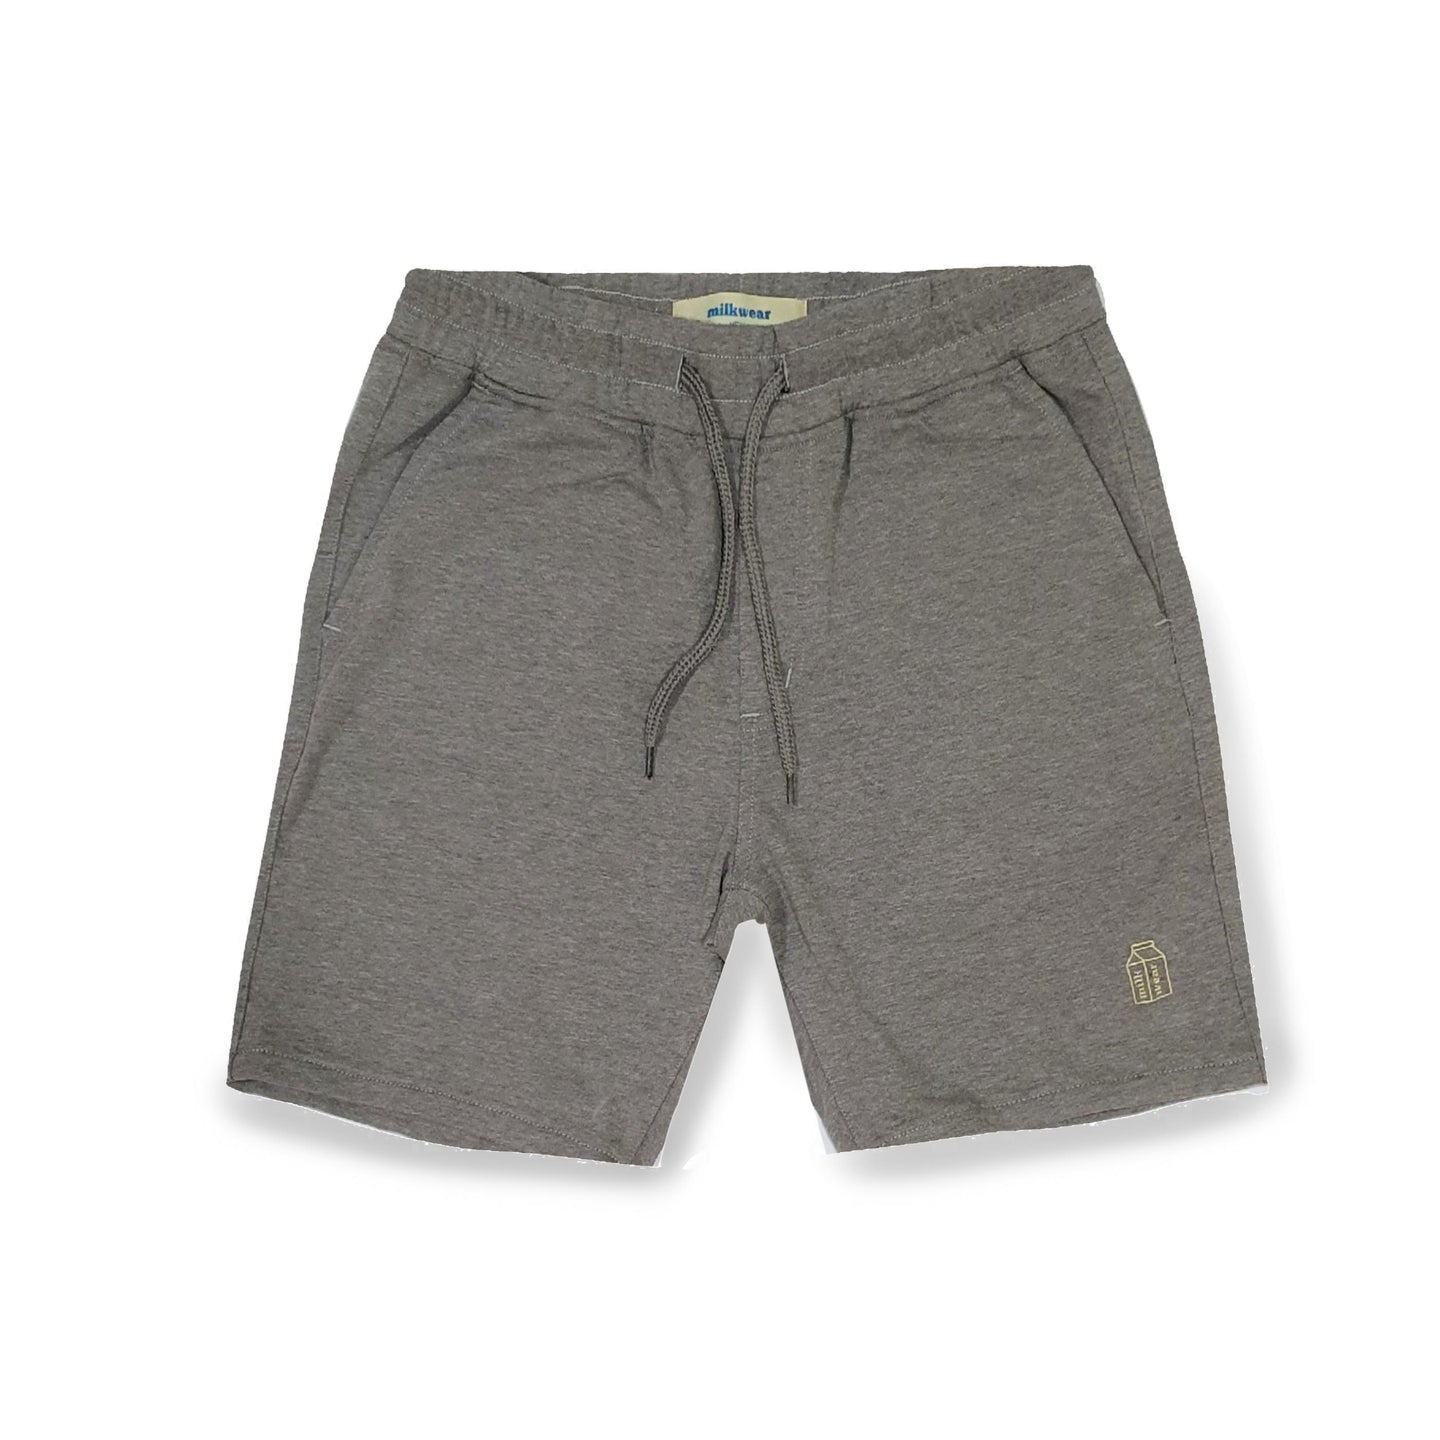 French Terry Shorts in Gray